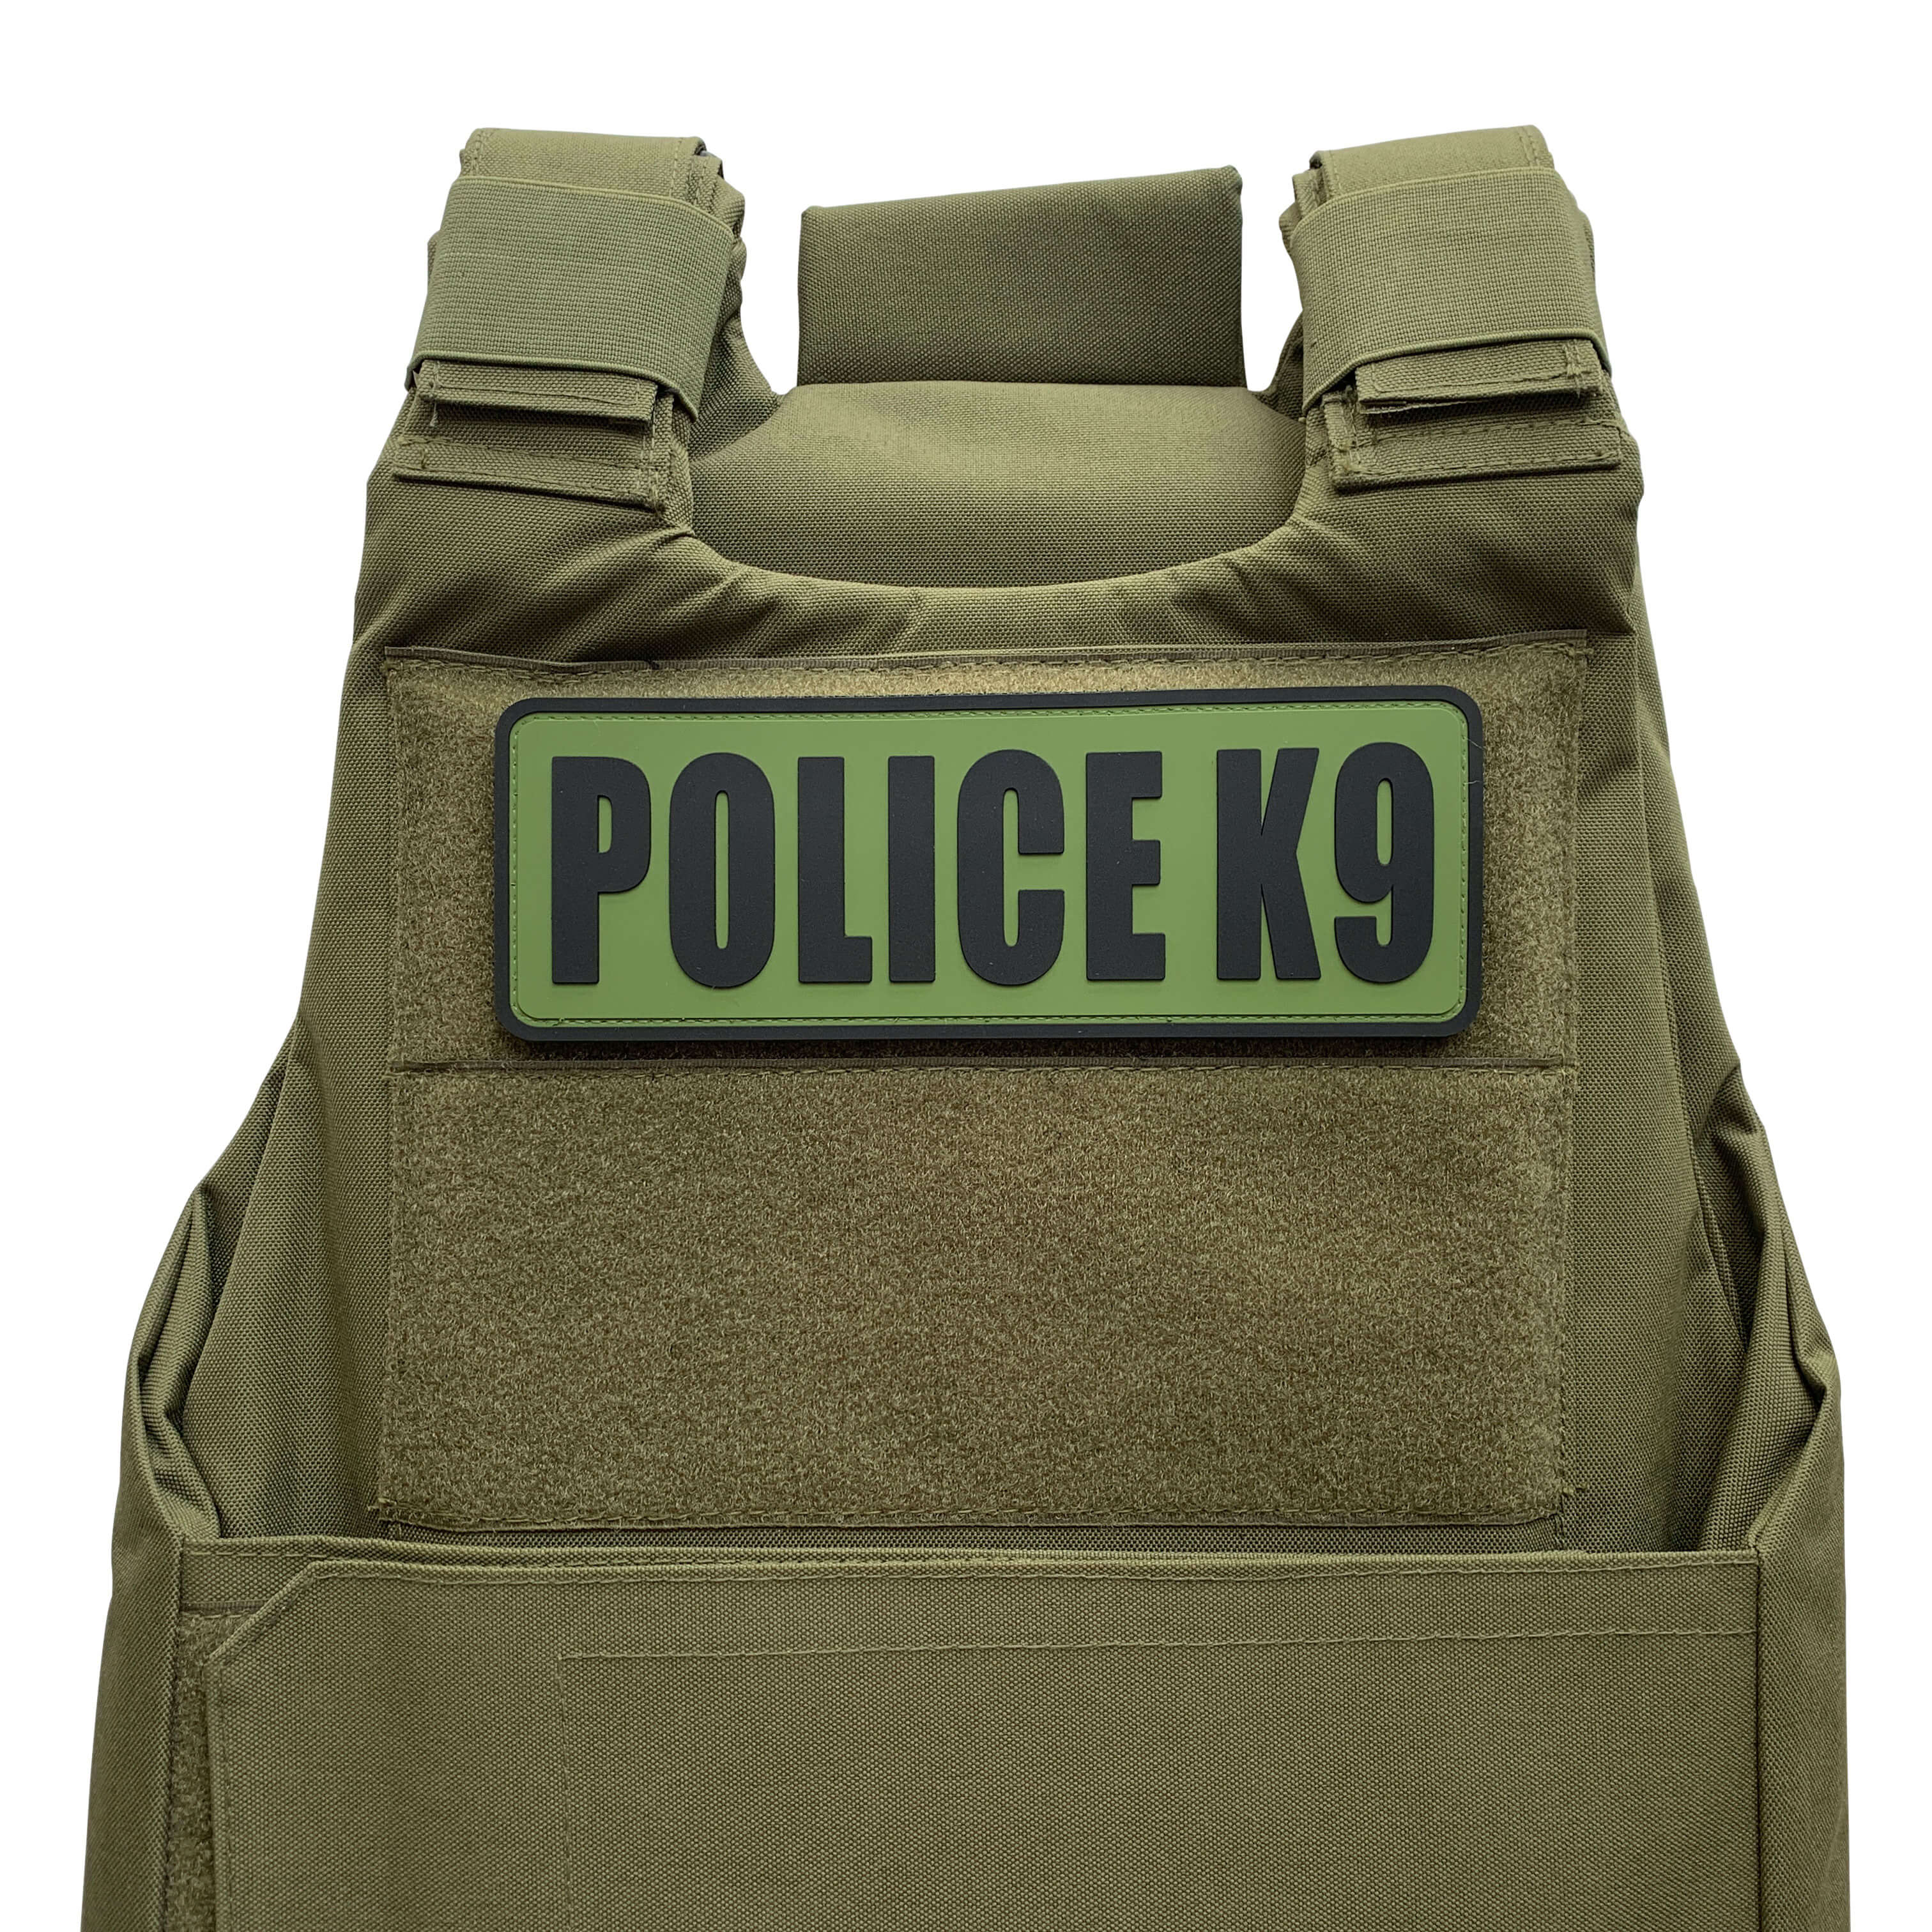 uuKen Large 8.5x3 inches PVC Rubber Military Tactical Police K9 Vest P